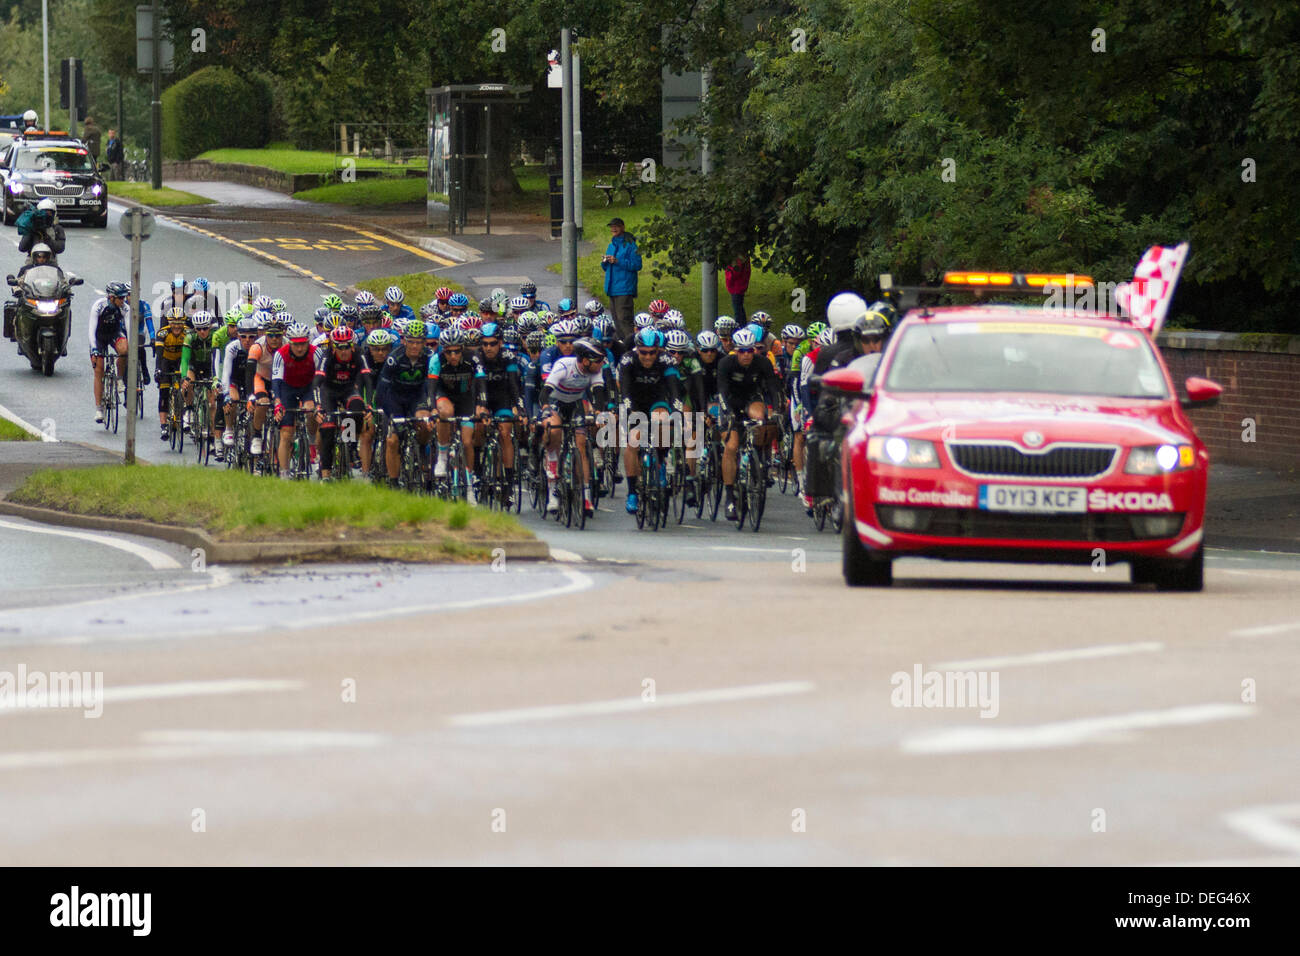 Stoke on Trent, Staffordshire, UK. 18th Sep, 2013. Cyclists pass through the Trentham area of Stoke on Trent, Staffordshire on stage 4 of the Tour of Britain, starting in Stoke on Trent and finishing in Llanberis in Wales. Credit:  Alex Williams/Alamy Live News Stock Photo